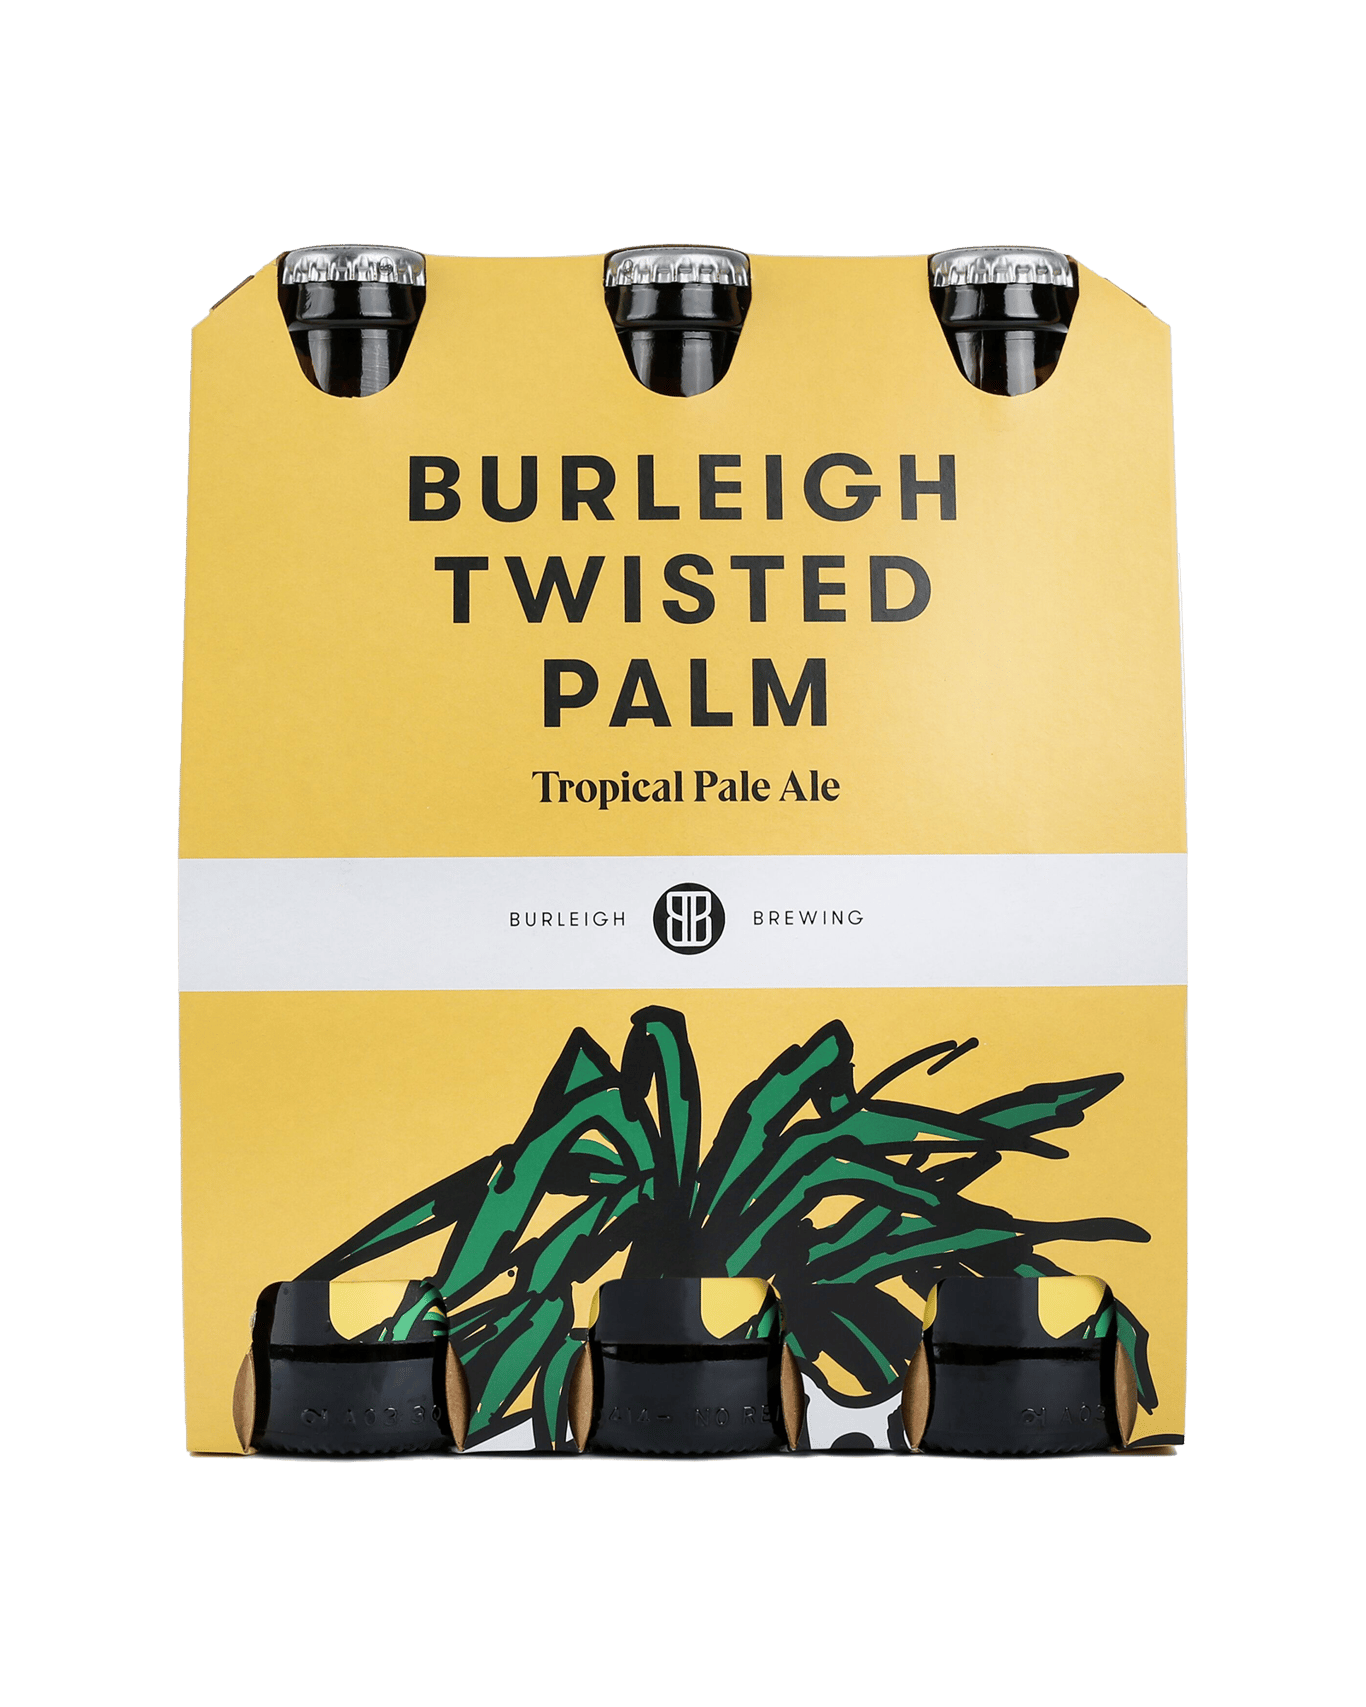 Buy Burleigh Brewing Co Twisted Palm Tropic Pale Ale Bottles 330ml